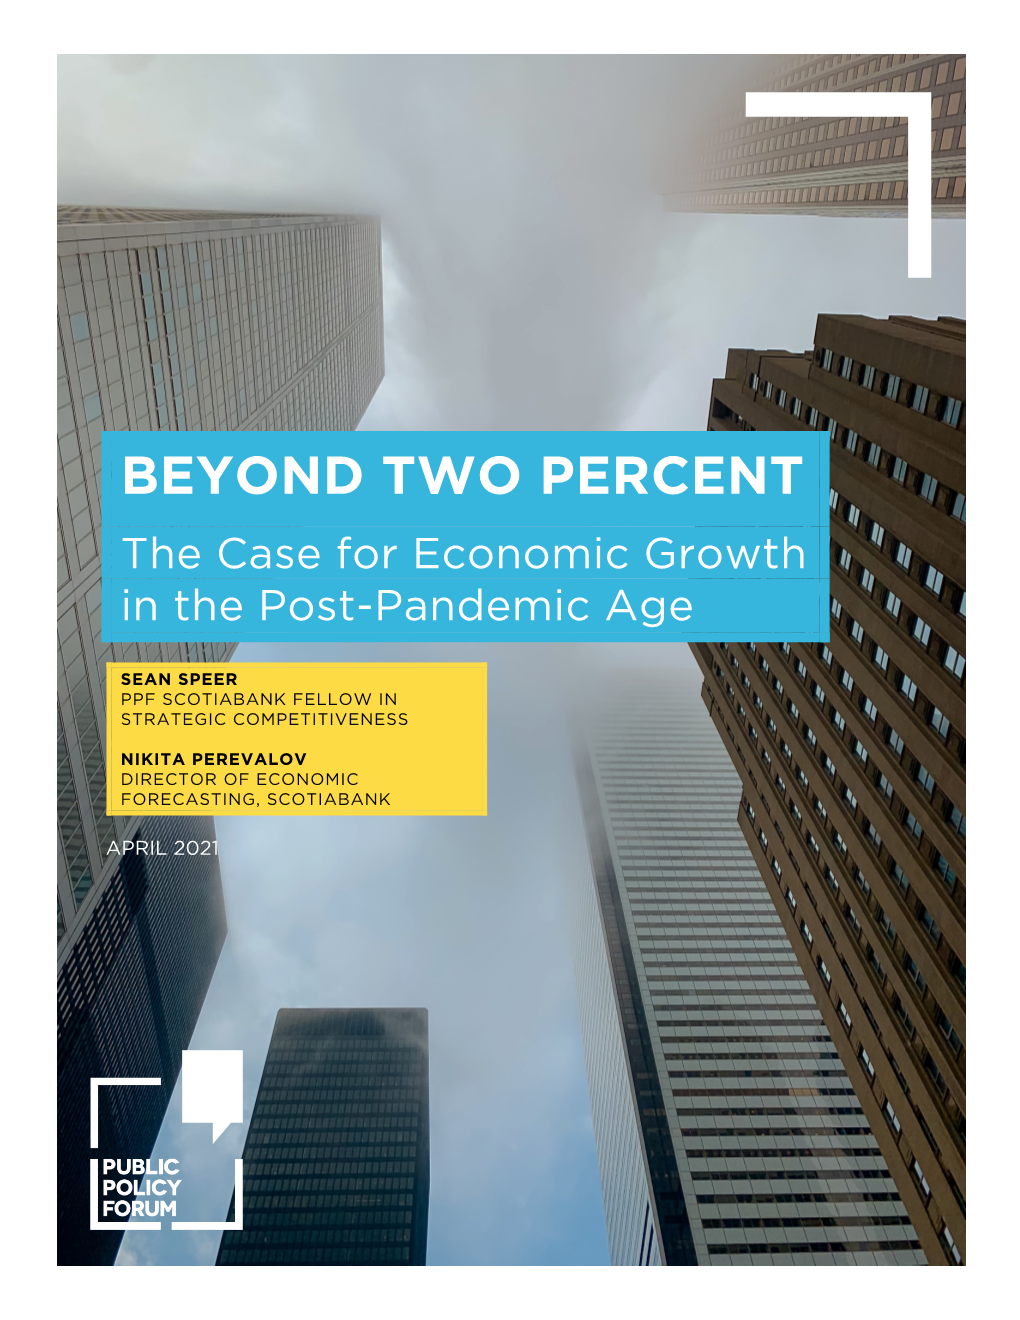 BEYOND TWO PERCENT the Case for Economic Growth in the Post-Pandemic Age